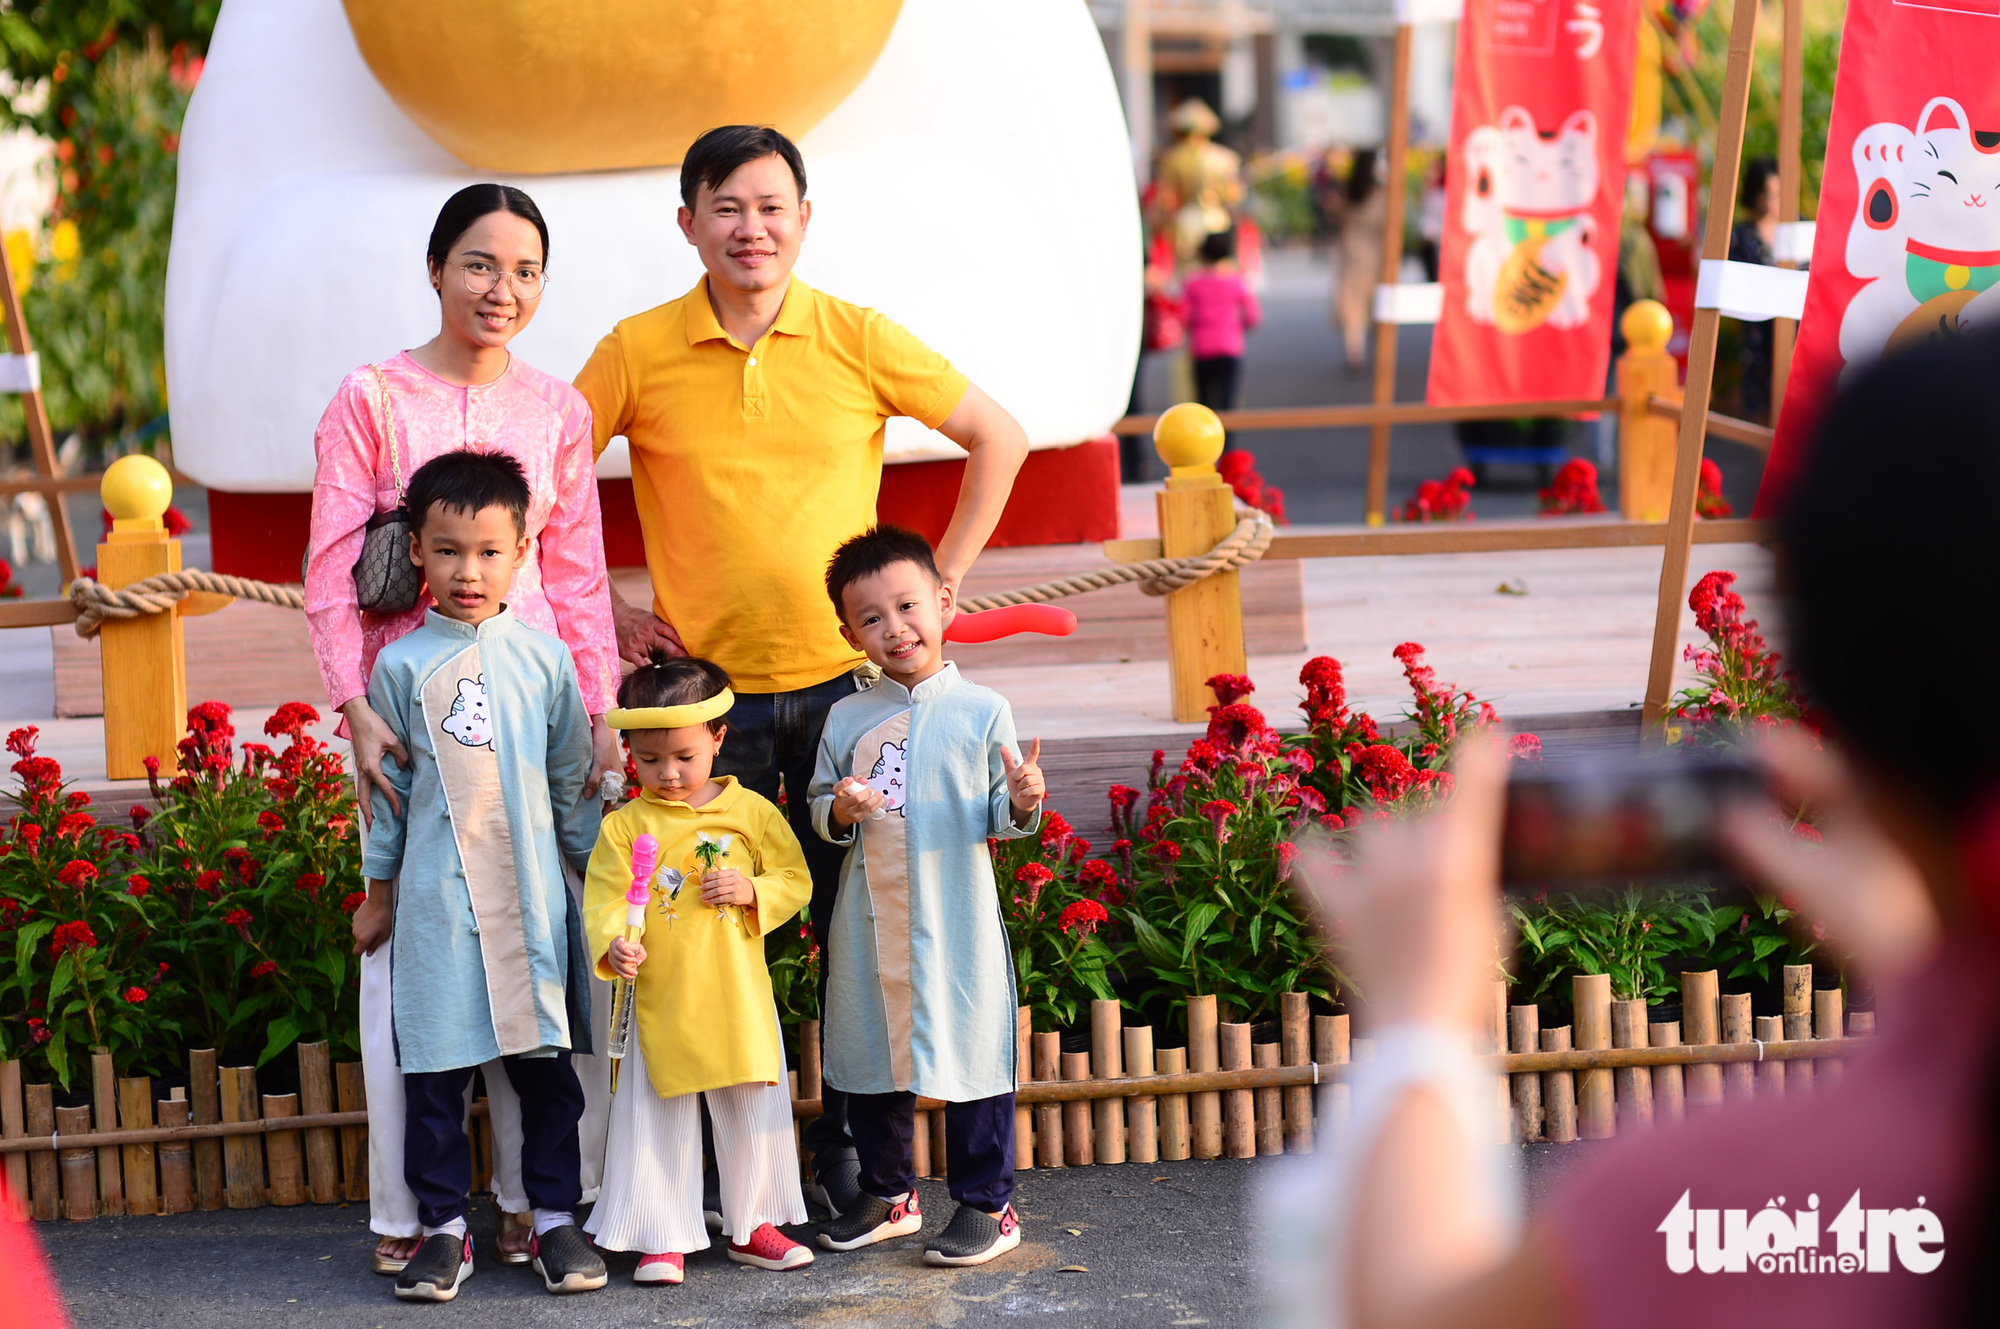 Many families pose for photos in the flower festival. Photo: Quang Dinh / Tuoi Tre